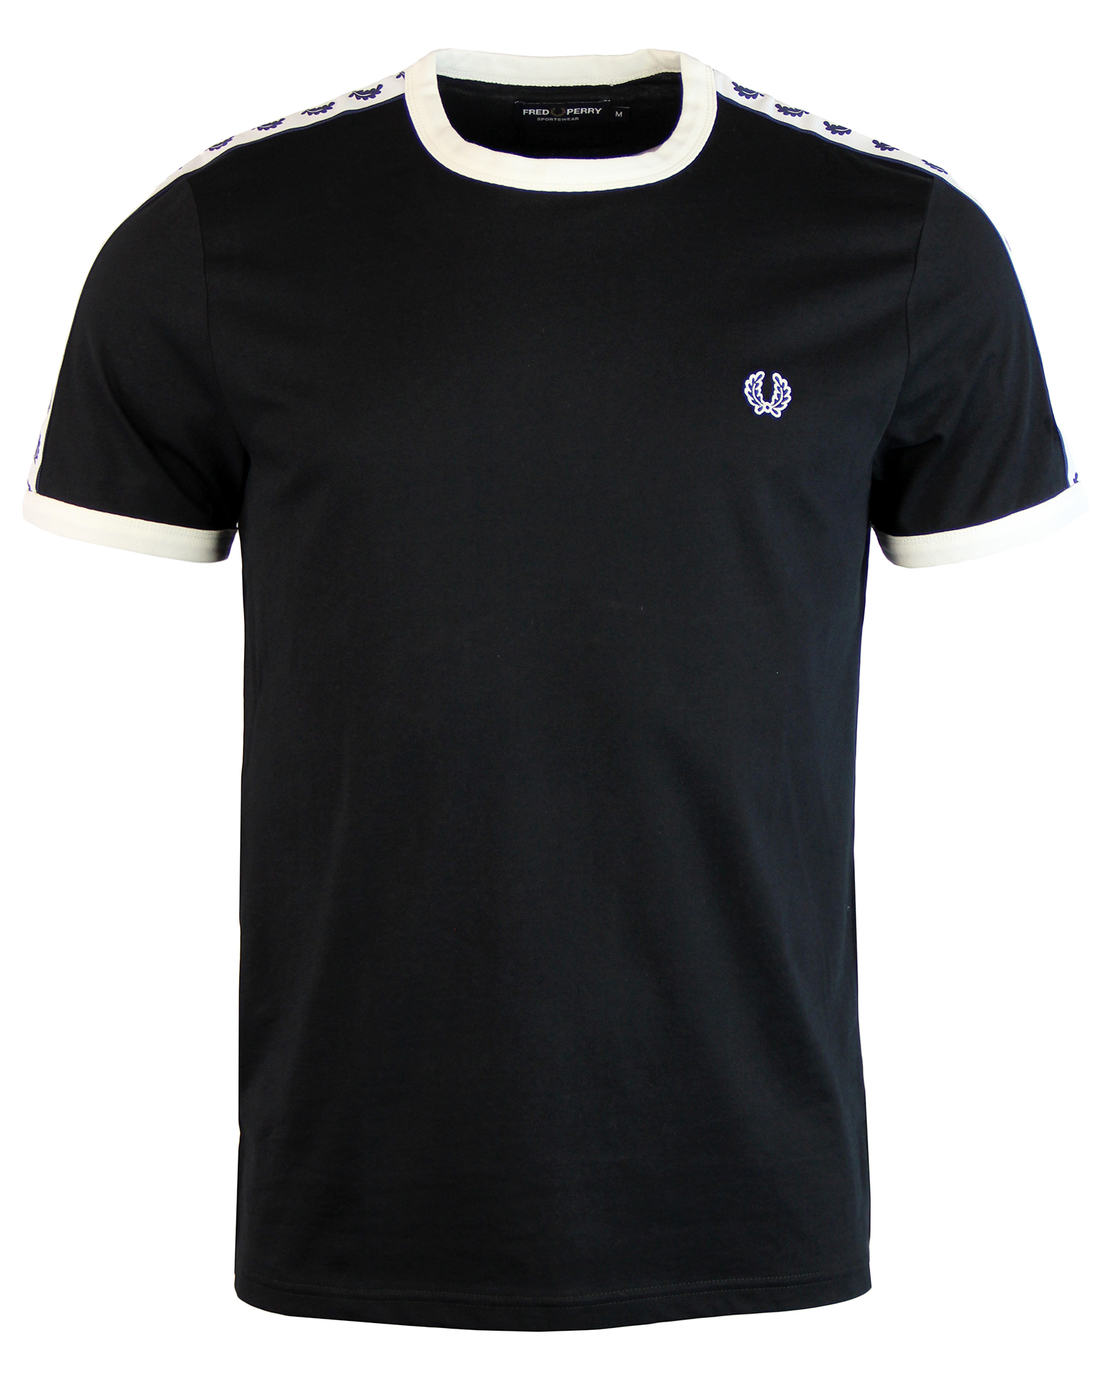 FRED PERRY Men's Retro Taped Sleeve Ringer Tee B